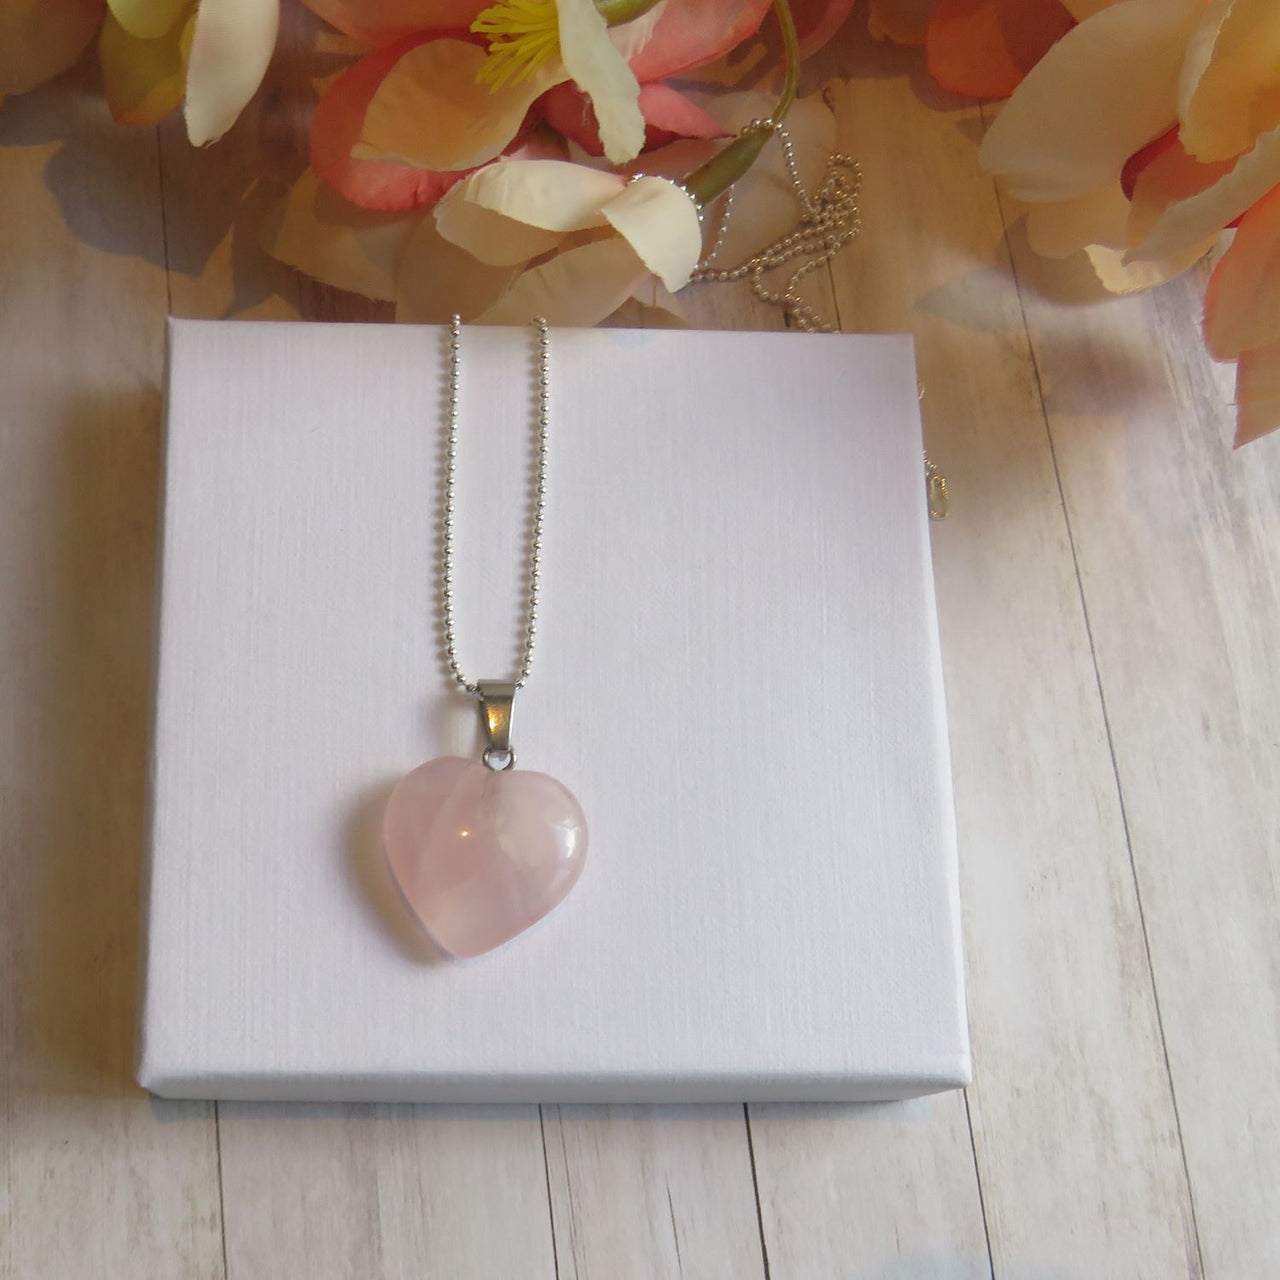 Natural stone heart sterling silver necklace